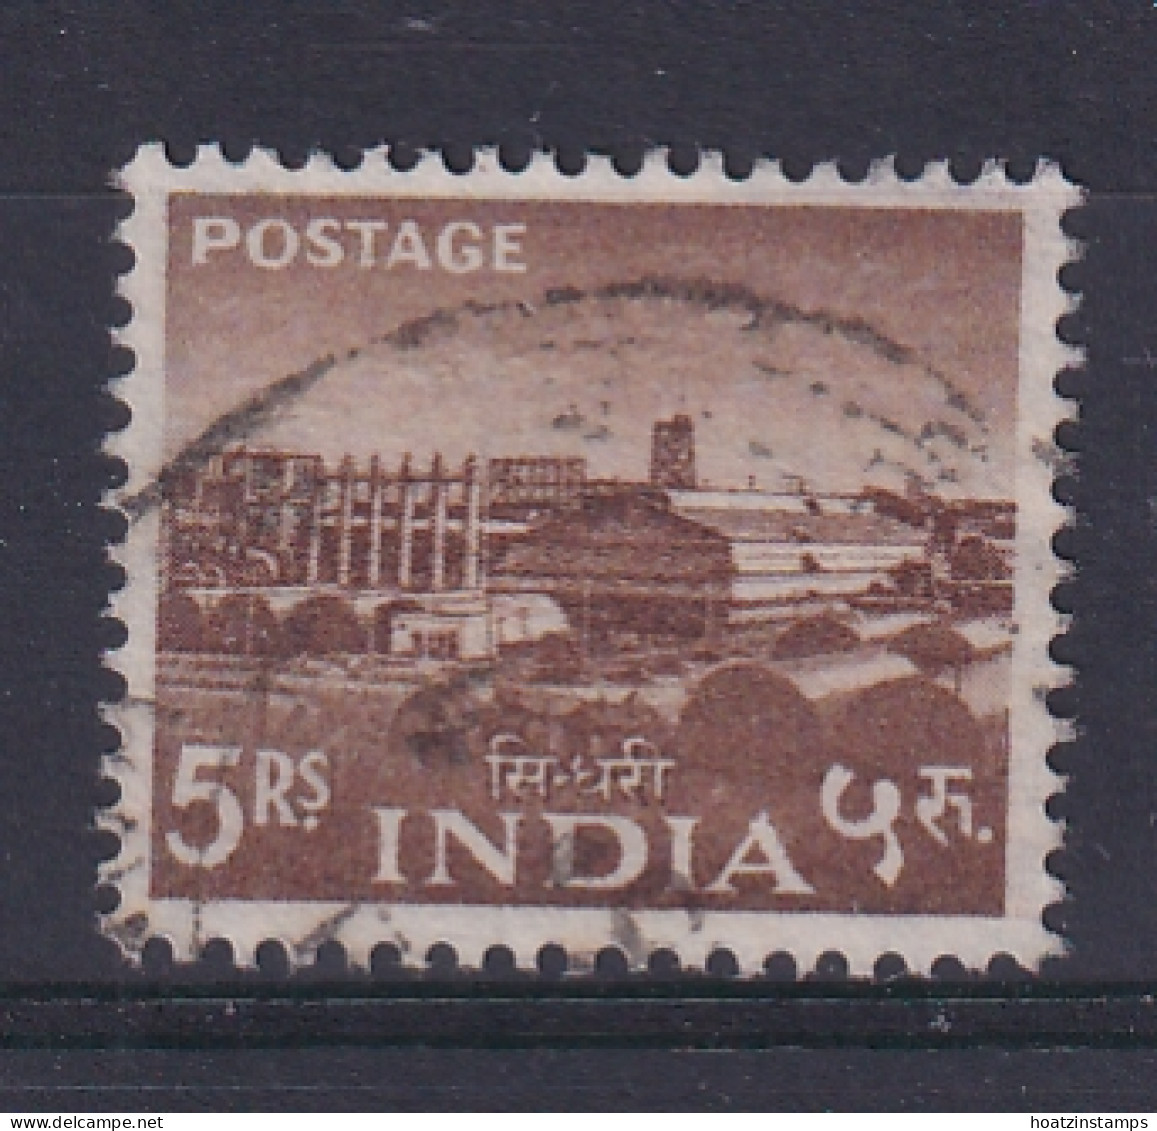 India: 1958/63   Pictorial    SG415     5R     Used - Gebraucht